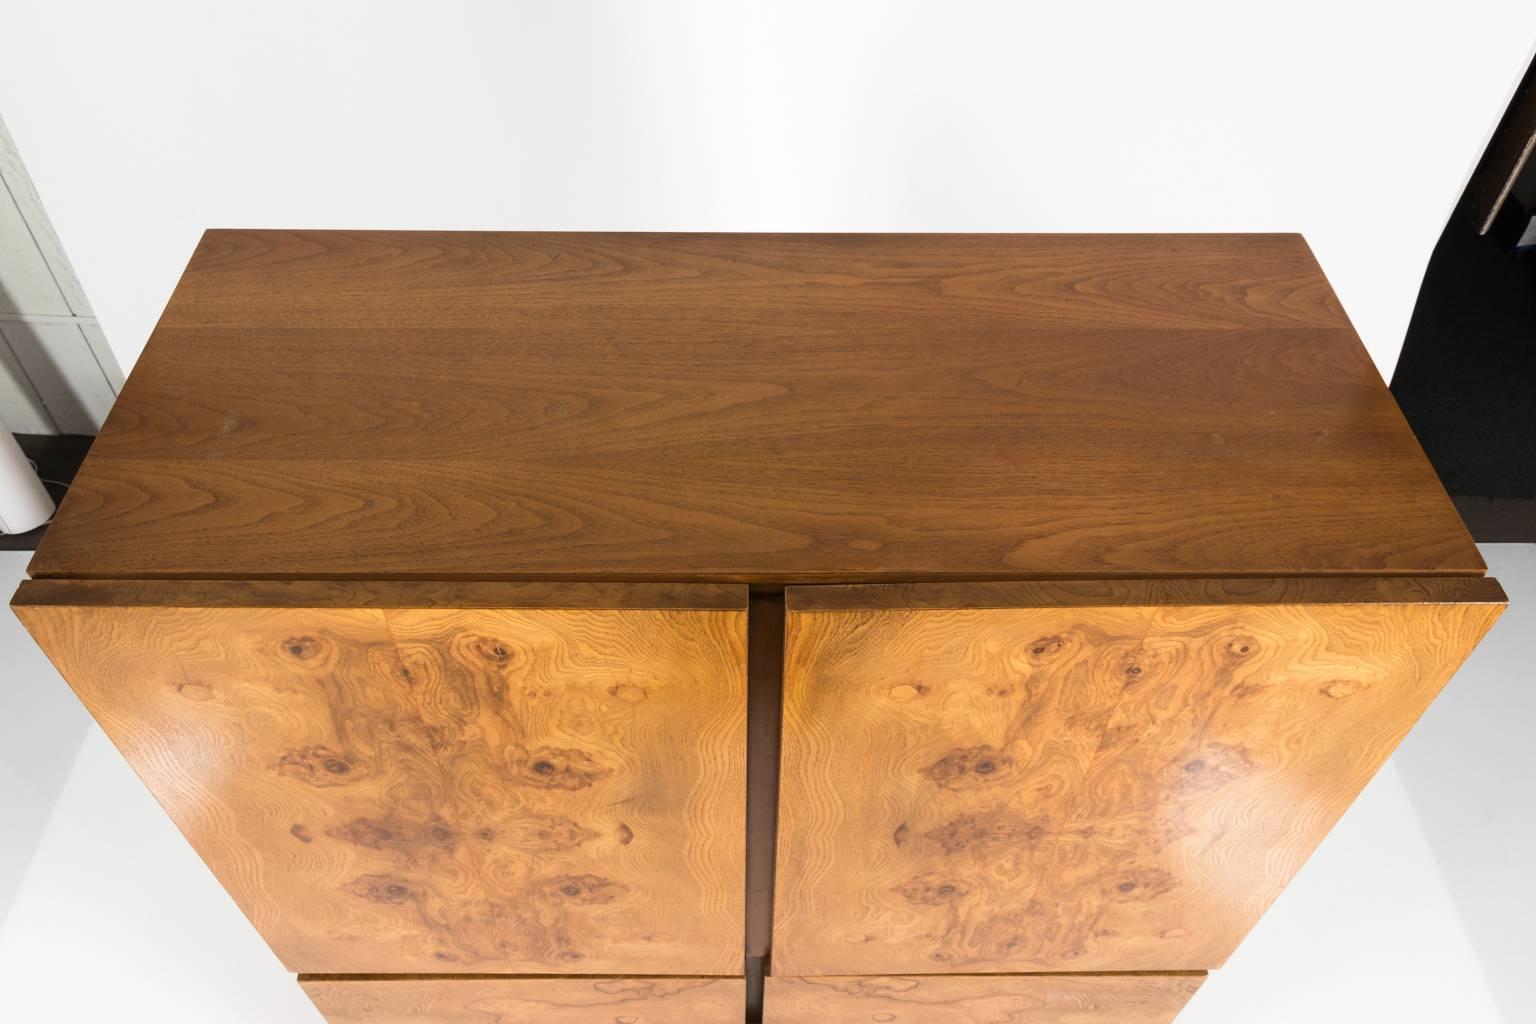 Two-door cupboard with three drawers in burl wood and walnut. Designed for Lane by Milo Baughman, circa 1970.
 